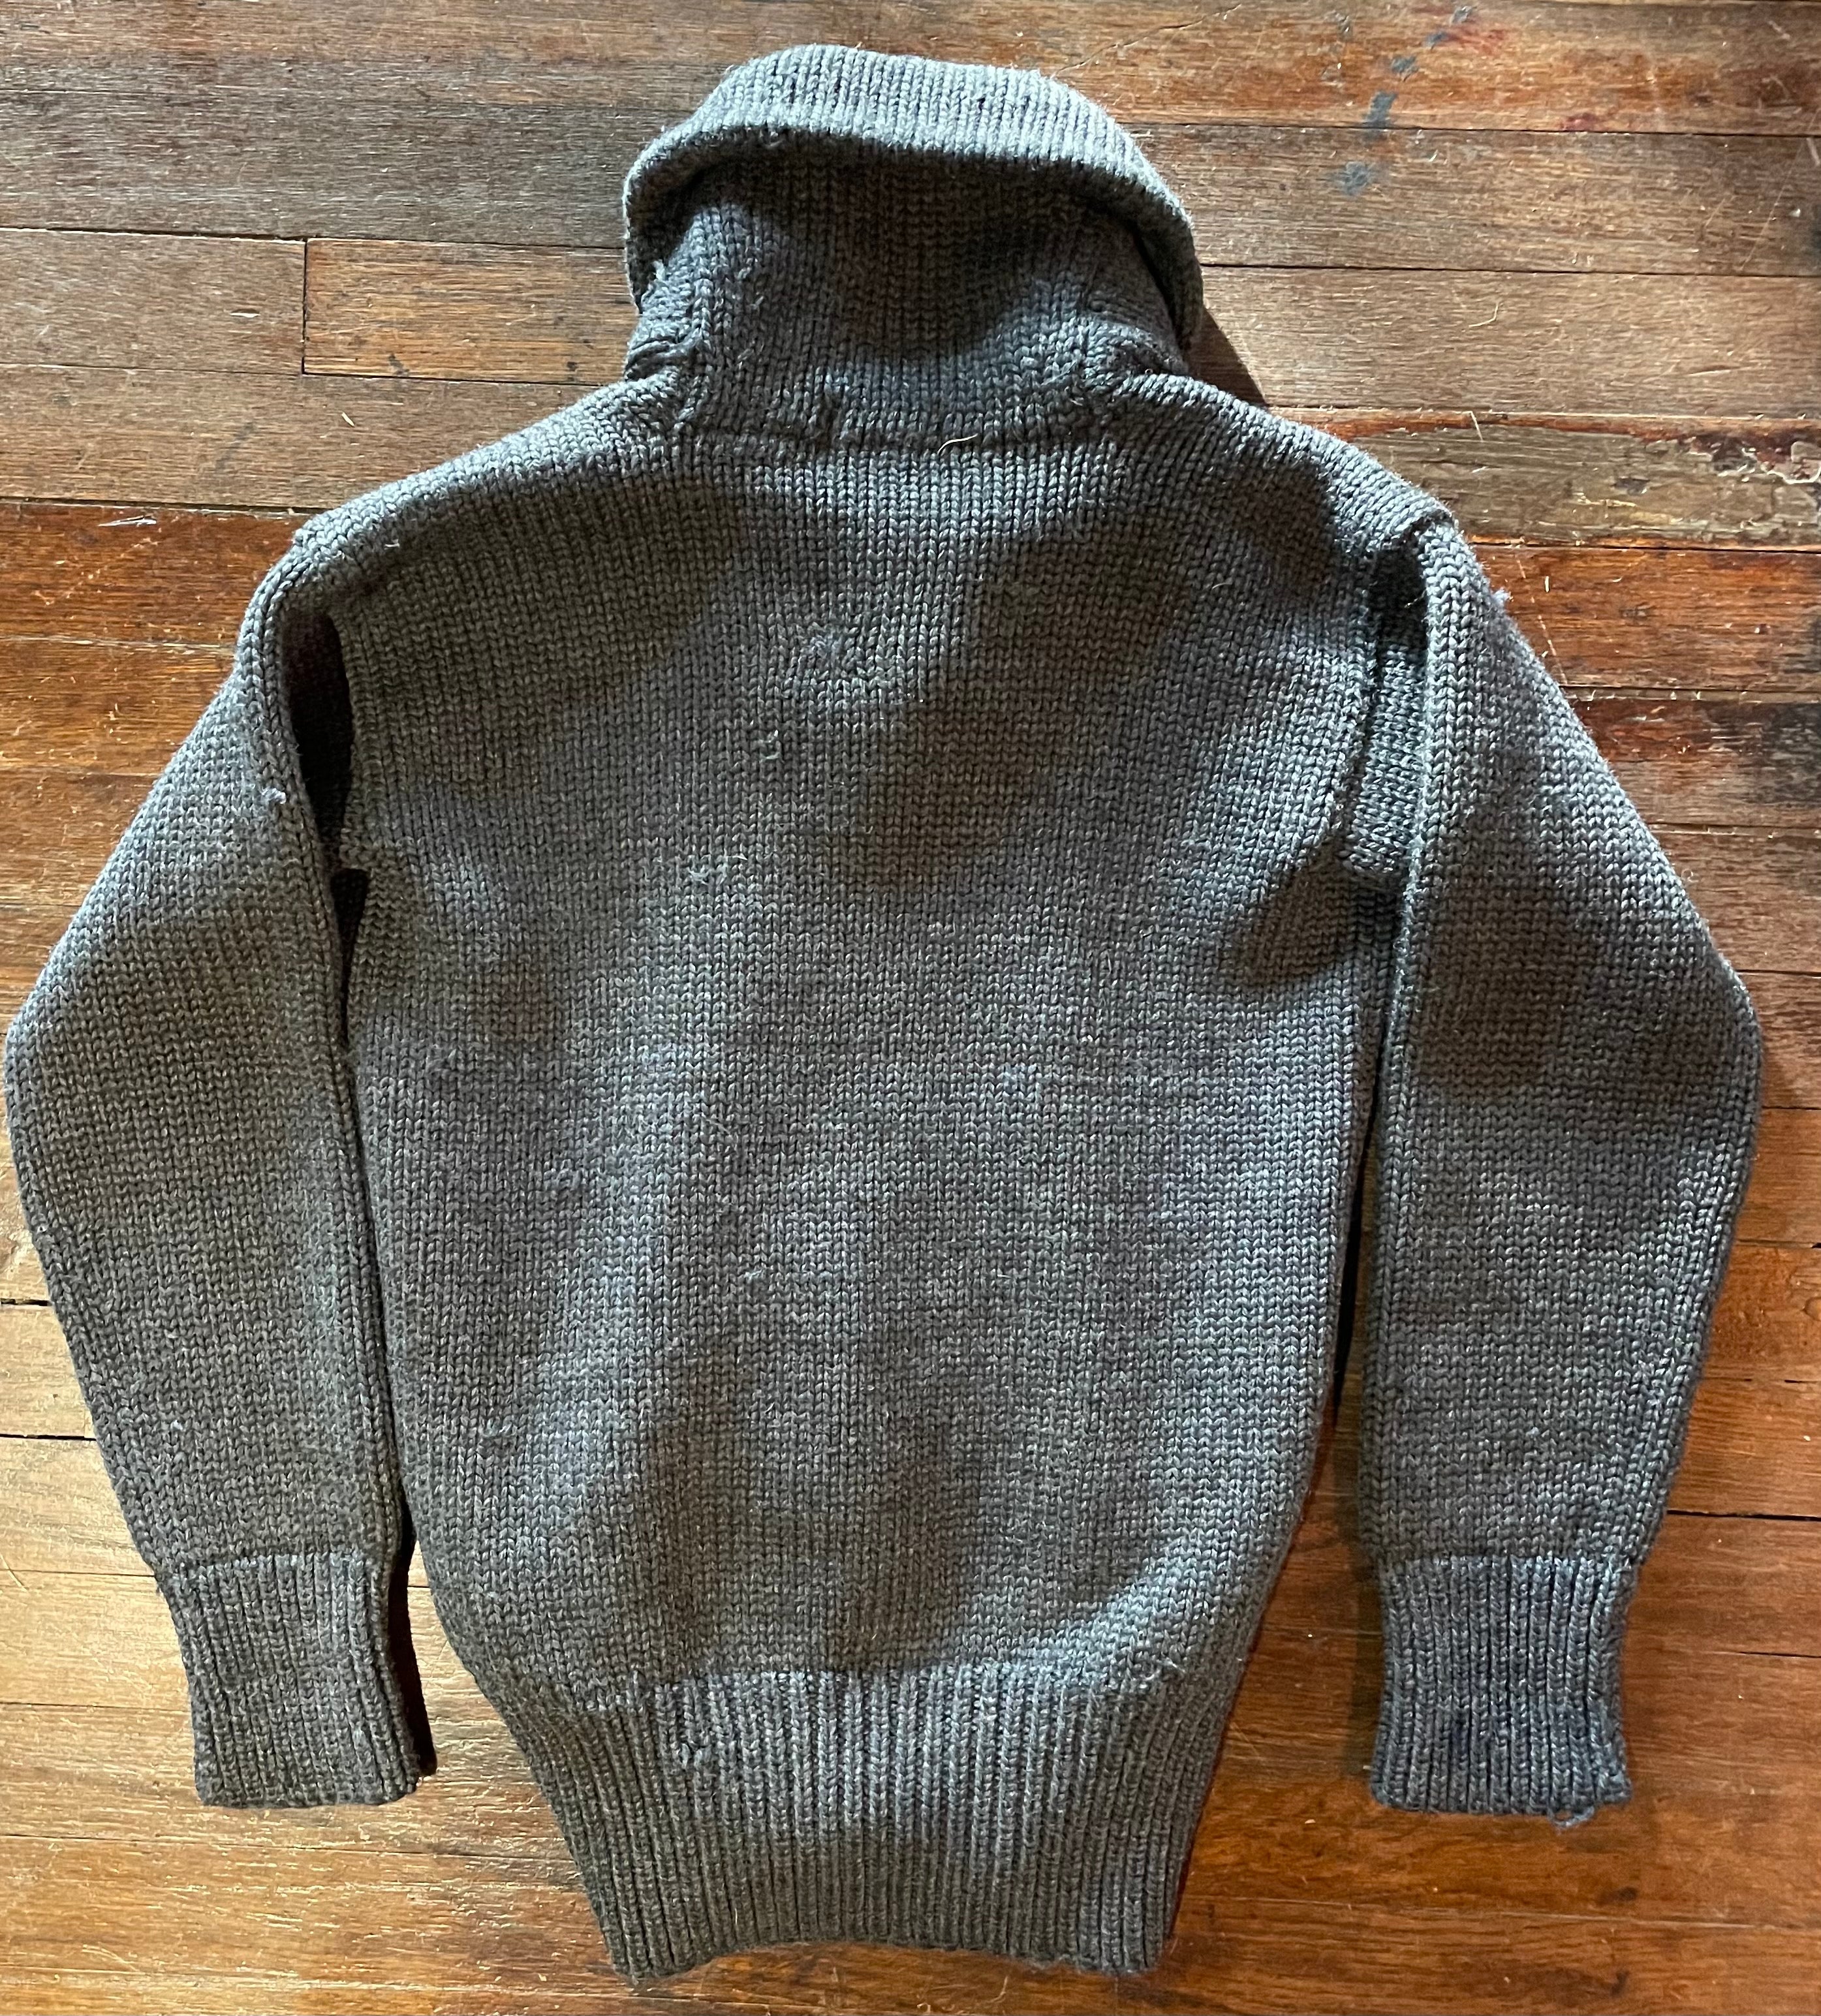 Rare Fisherman Wool Sweater with CRC Crossed Rifle Insignia Patch